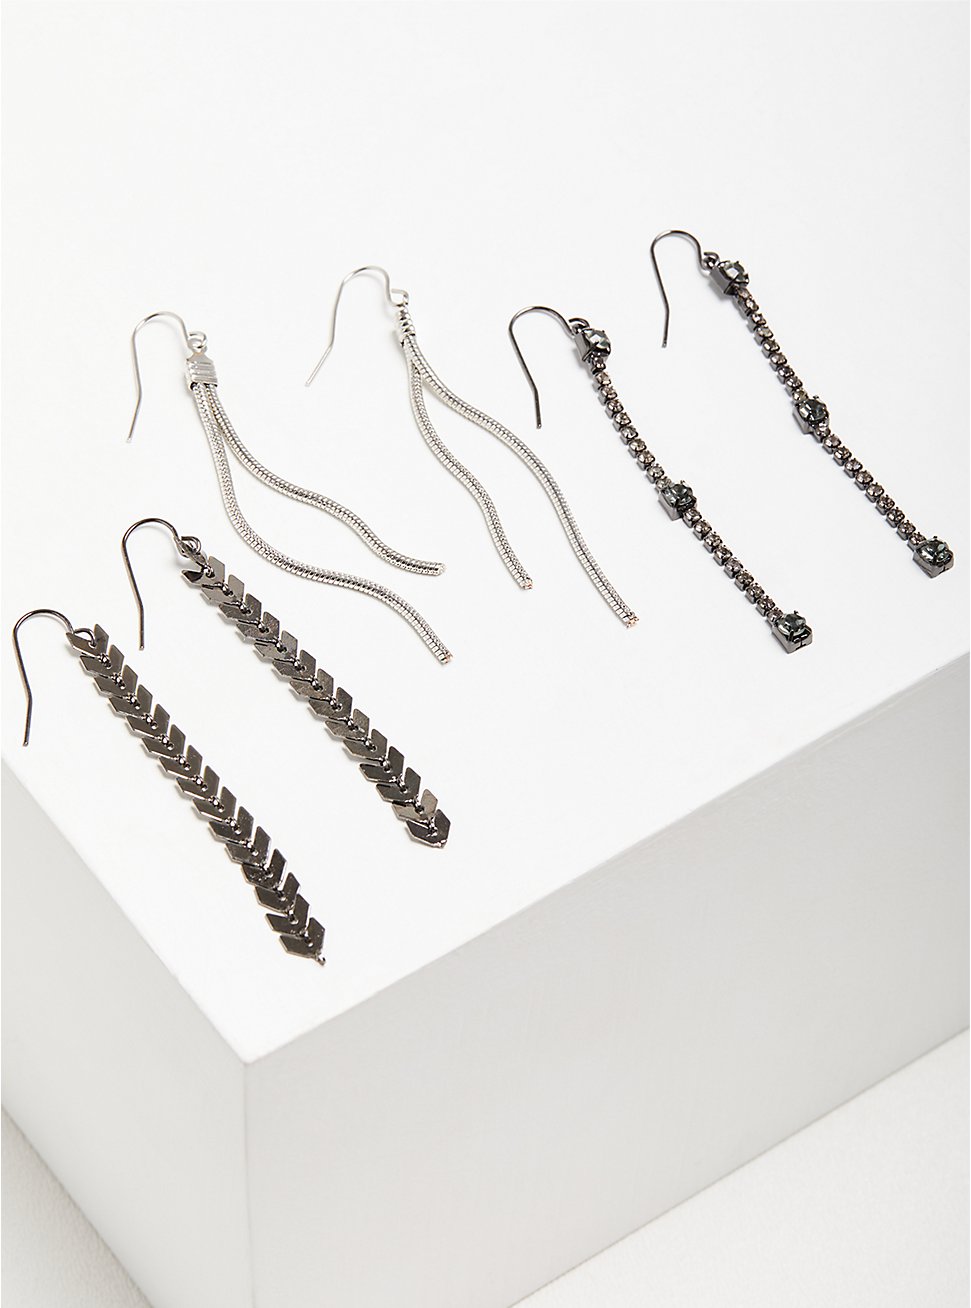 Chain Linear Earring Set of 3 - Black & Silver Tone, , hi-res